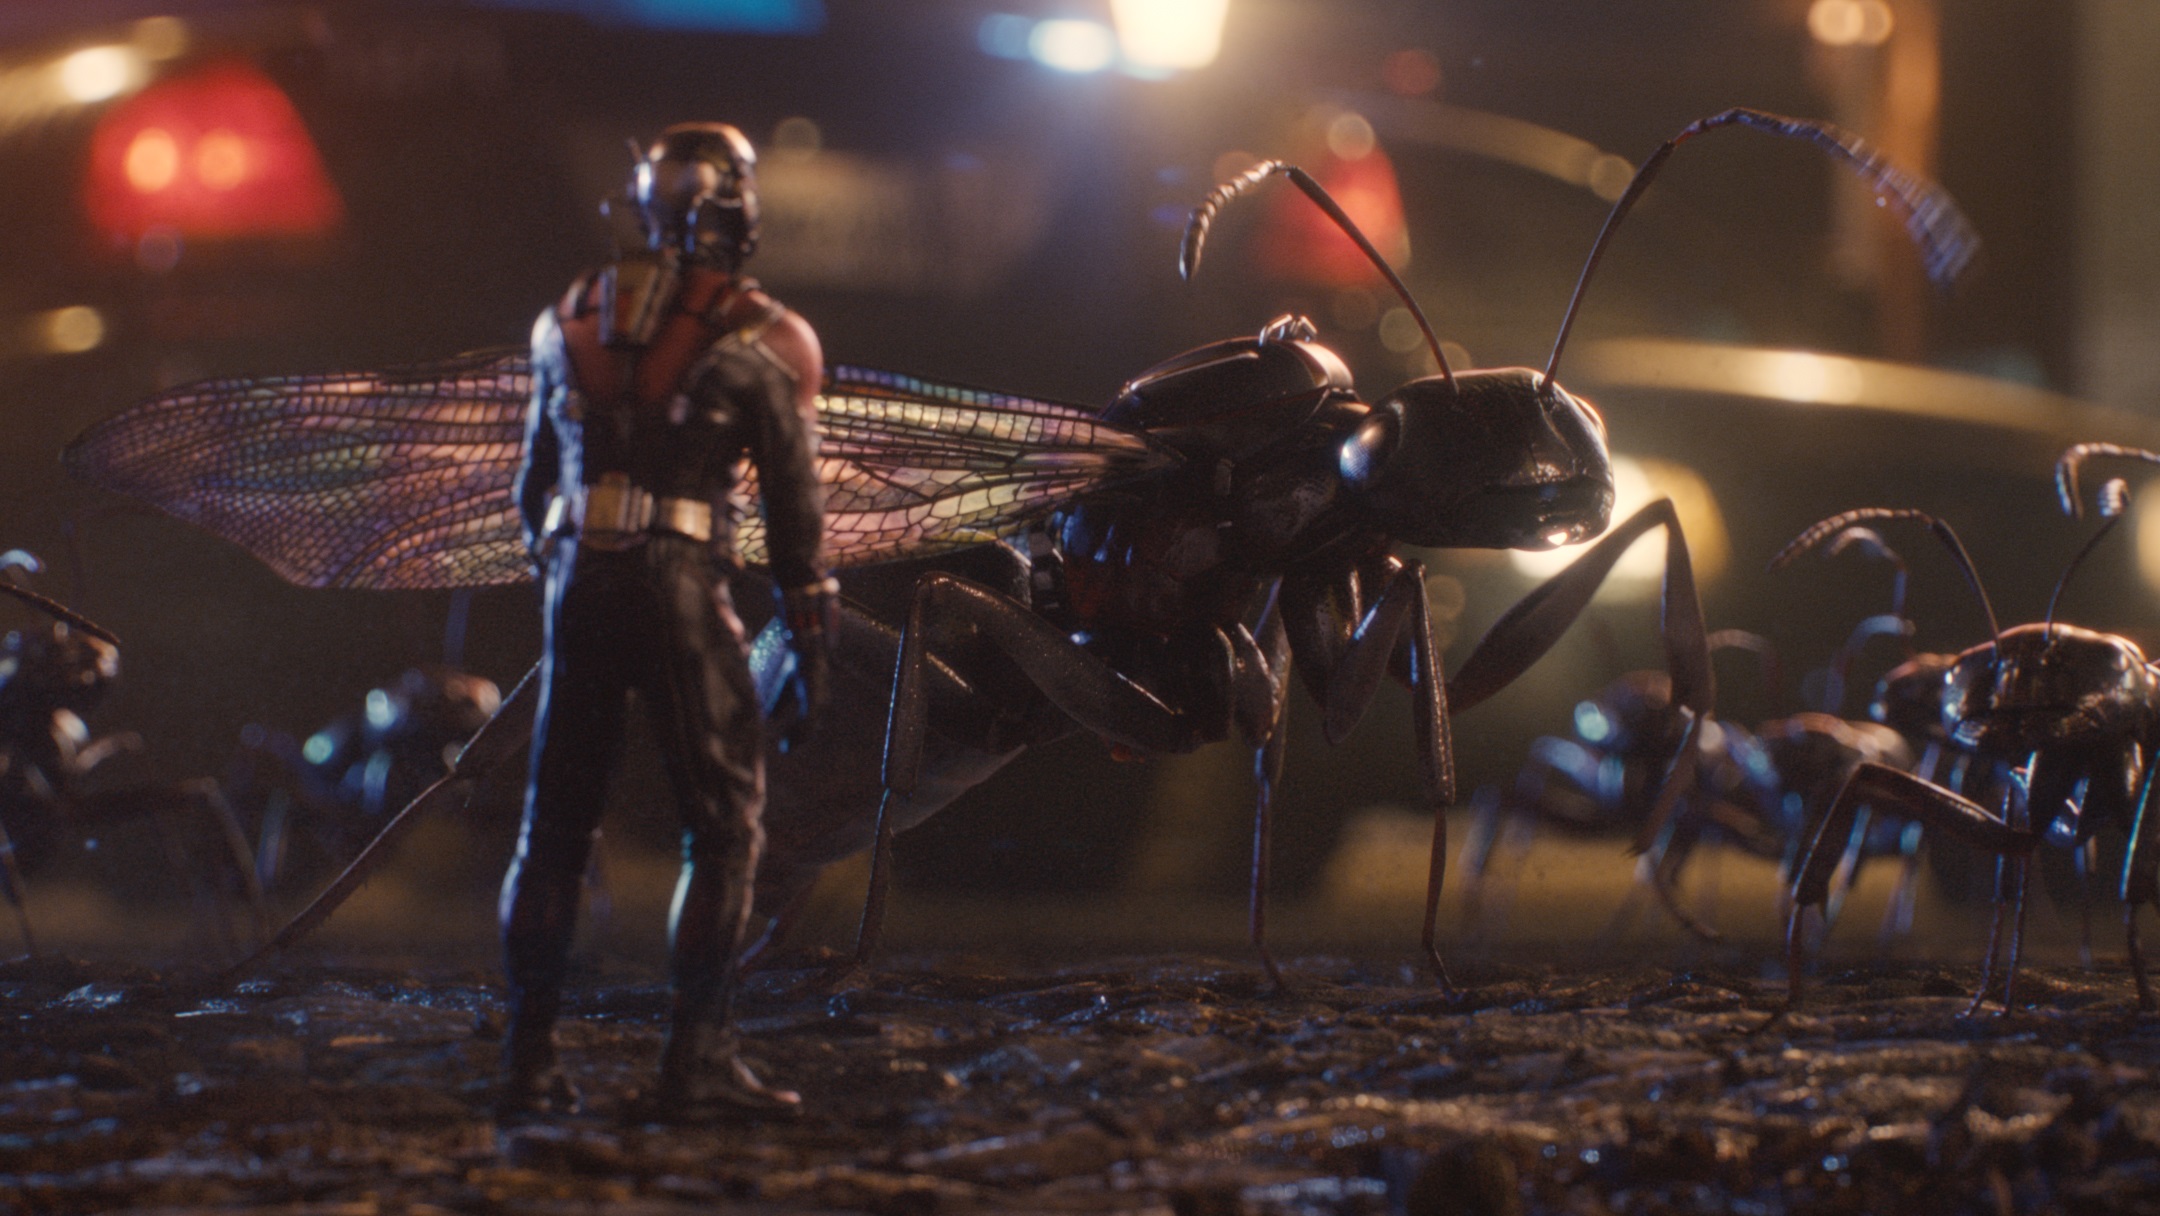 Videophiled: Get small with ‘Ant-Man’ or go ‘Blind’